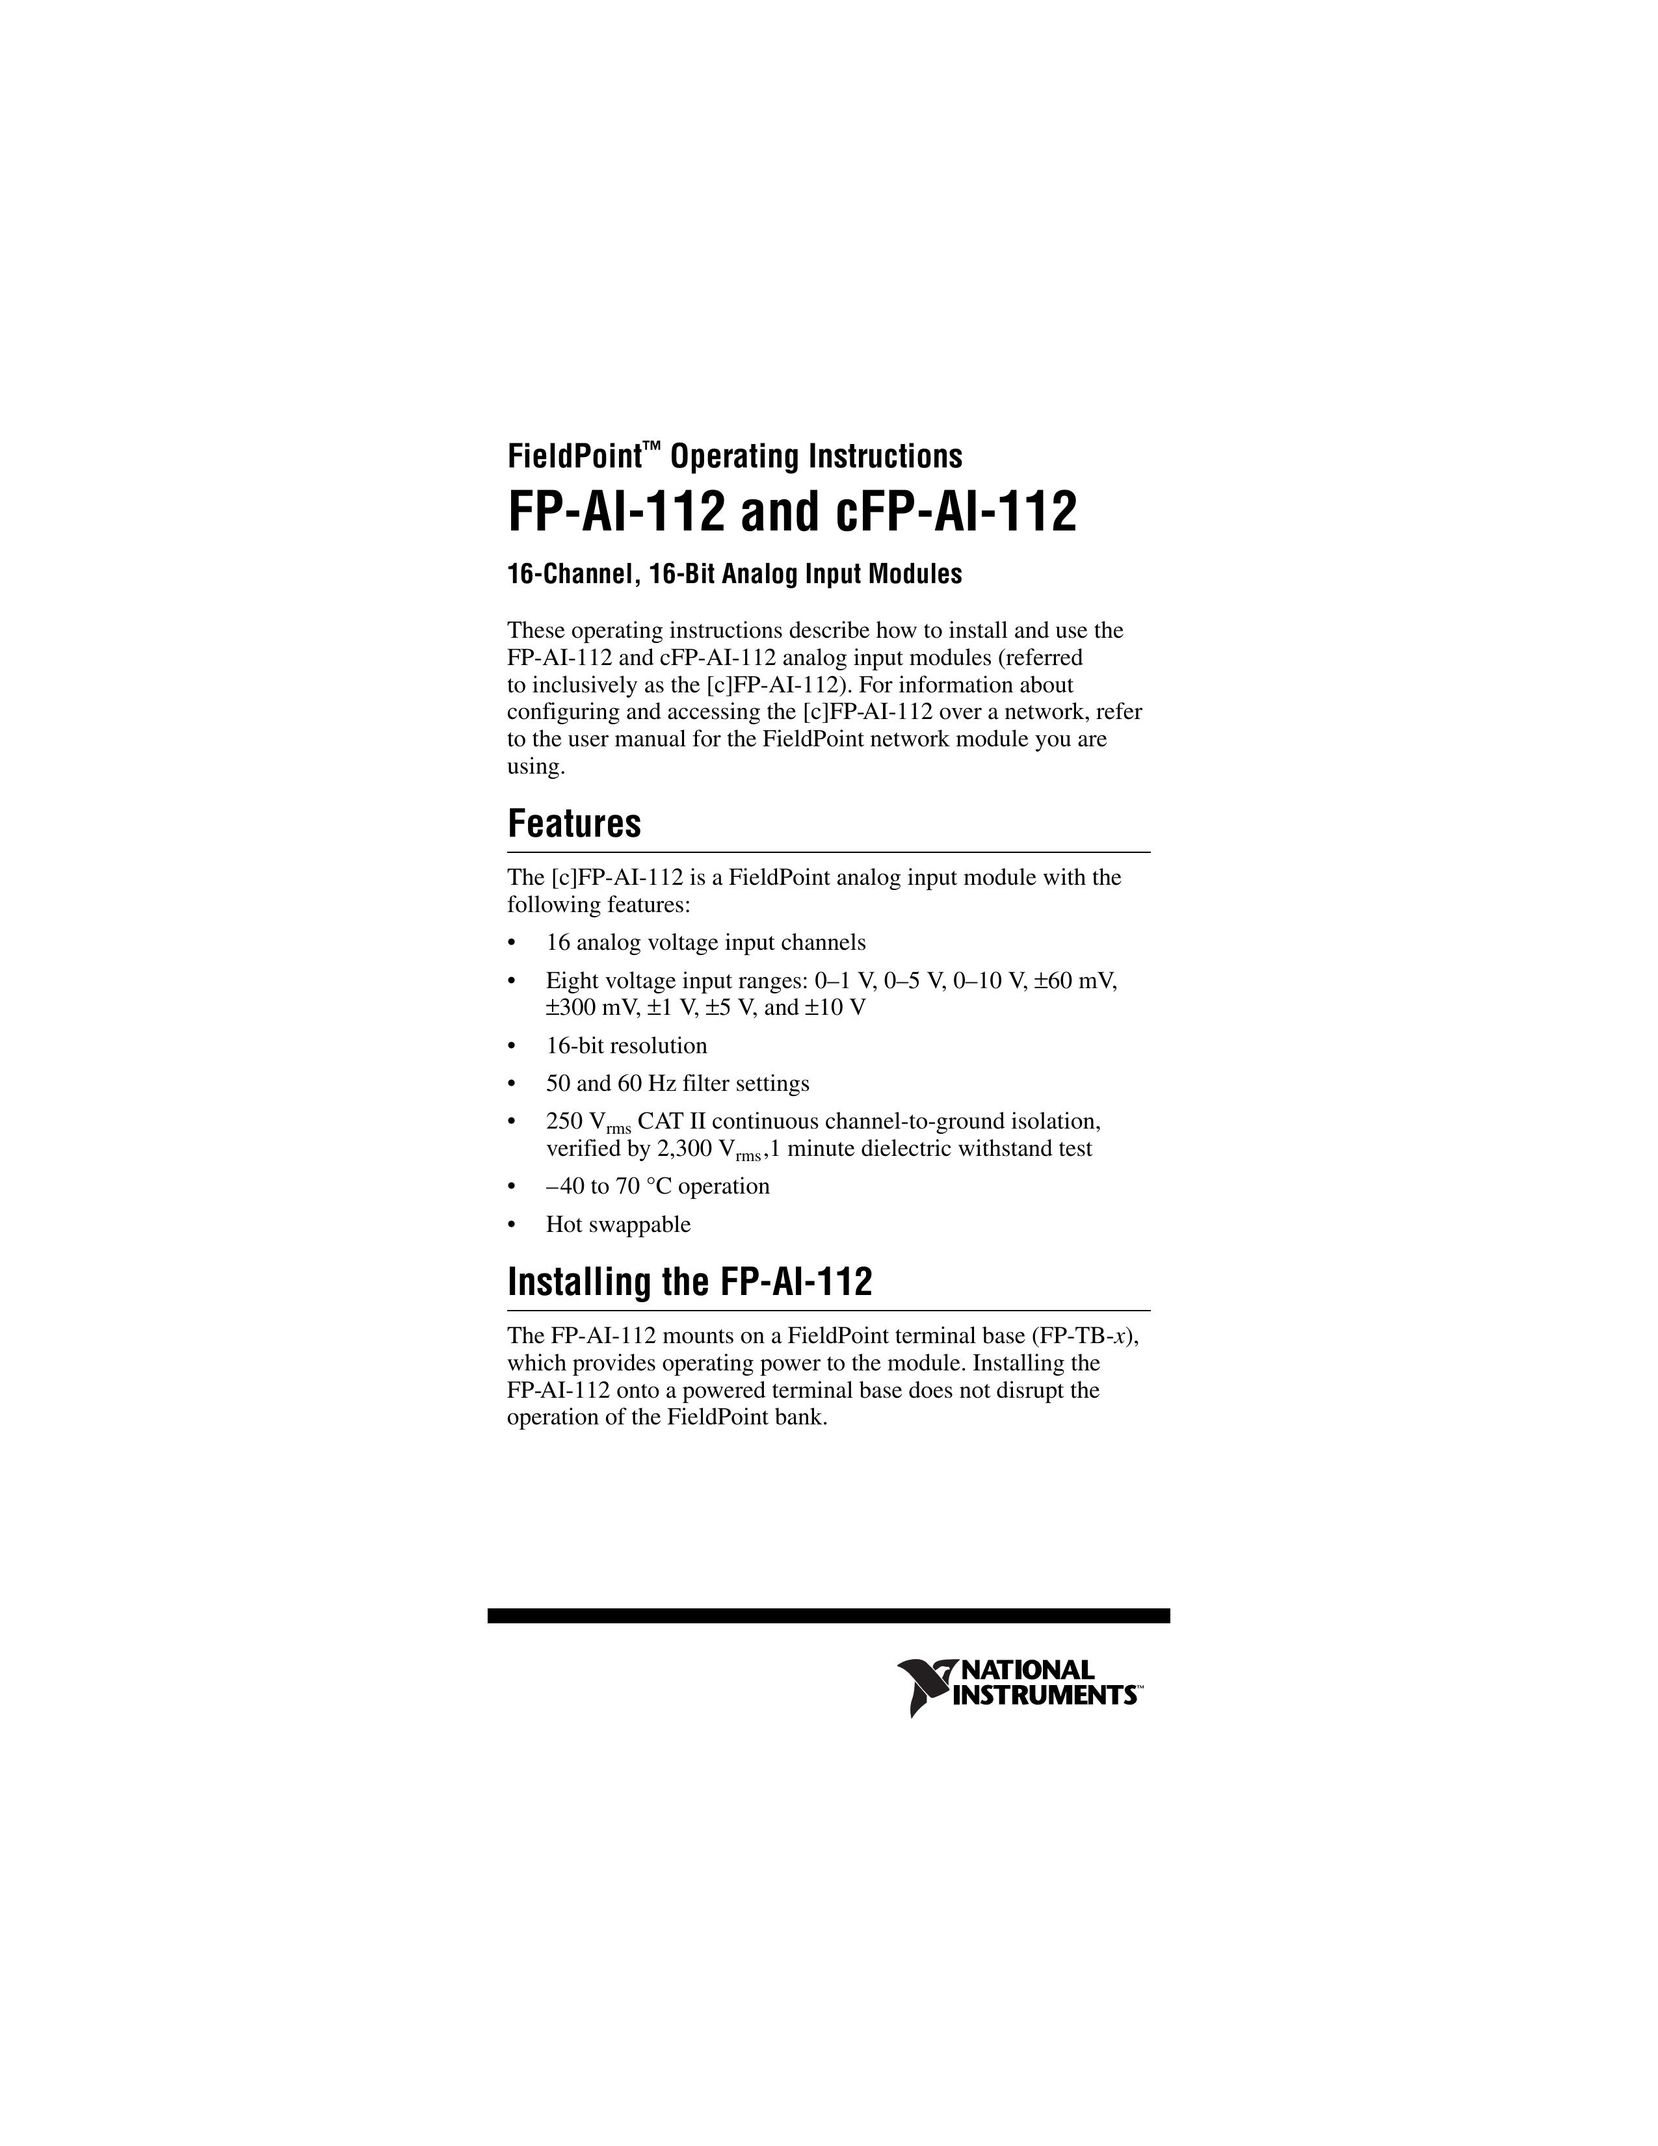 National Instruments FP-AI-112 Welding System User Manual